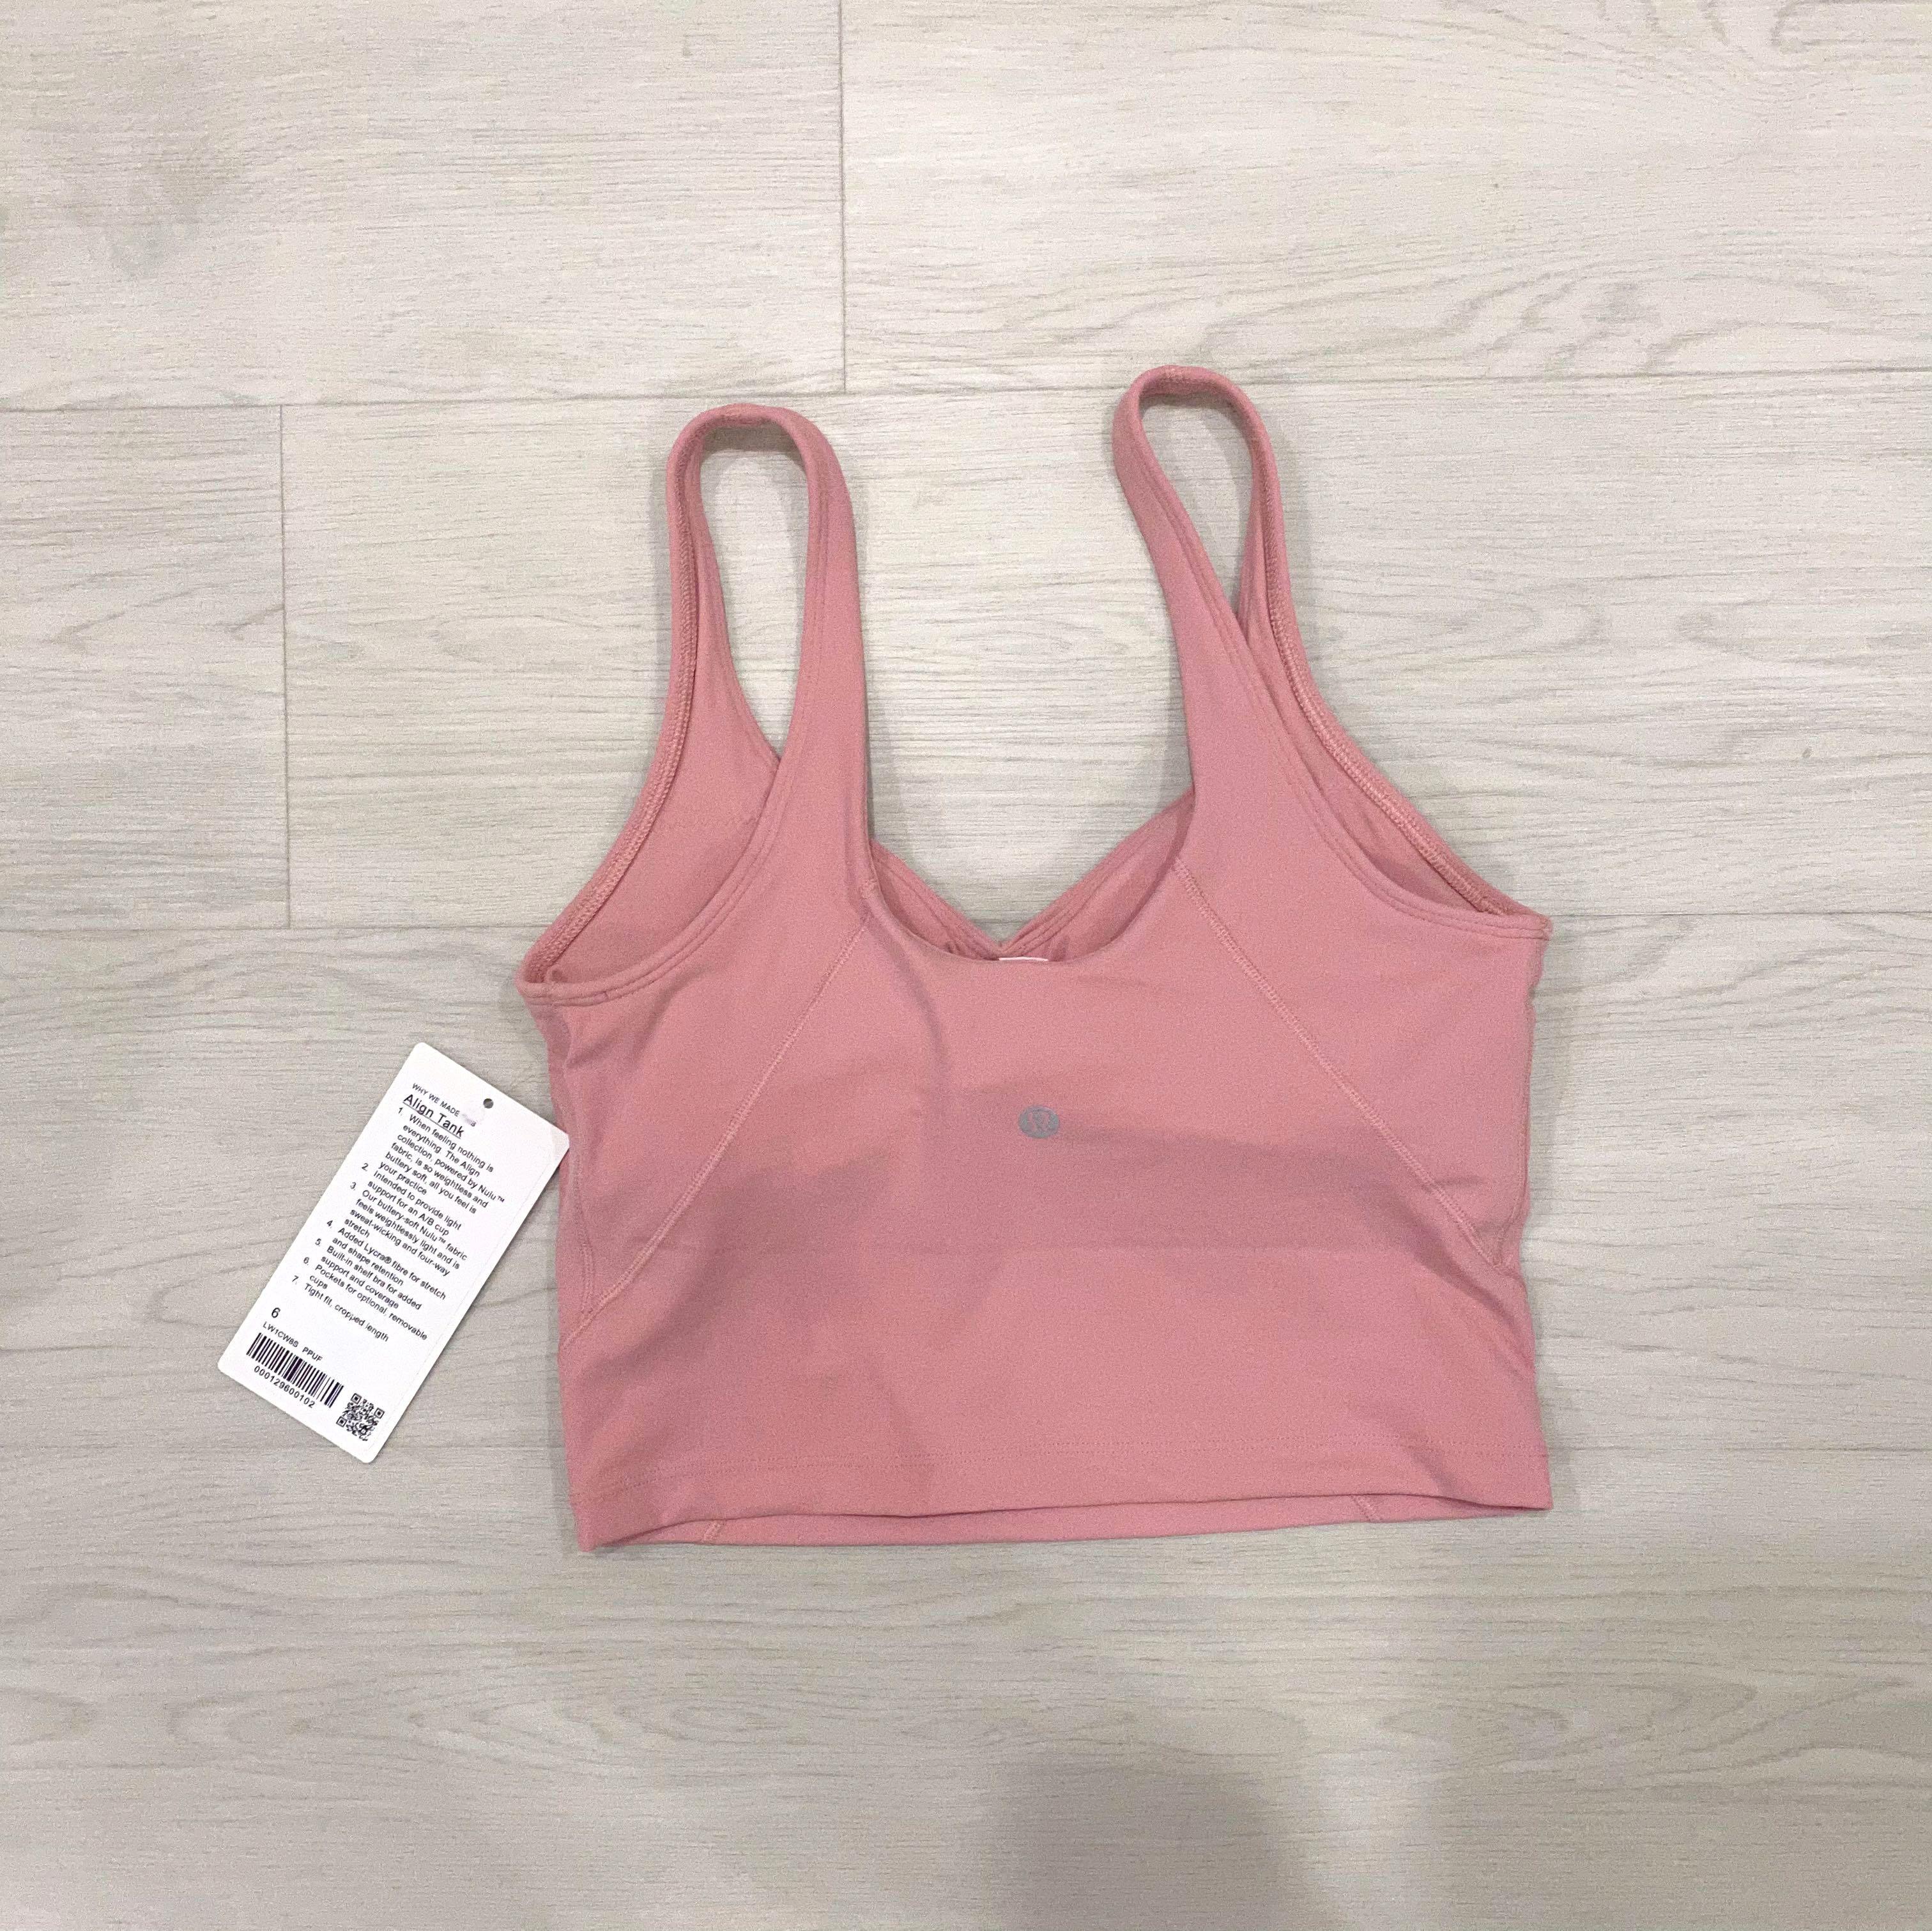 Lululemon Align Tank Top Pink Puff A/B Cup Tight Fit Cropped